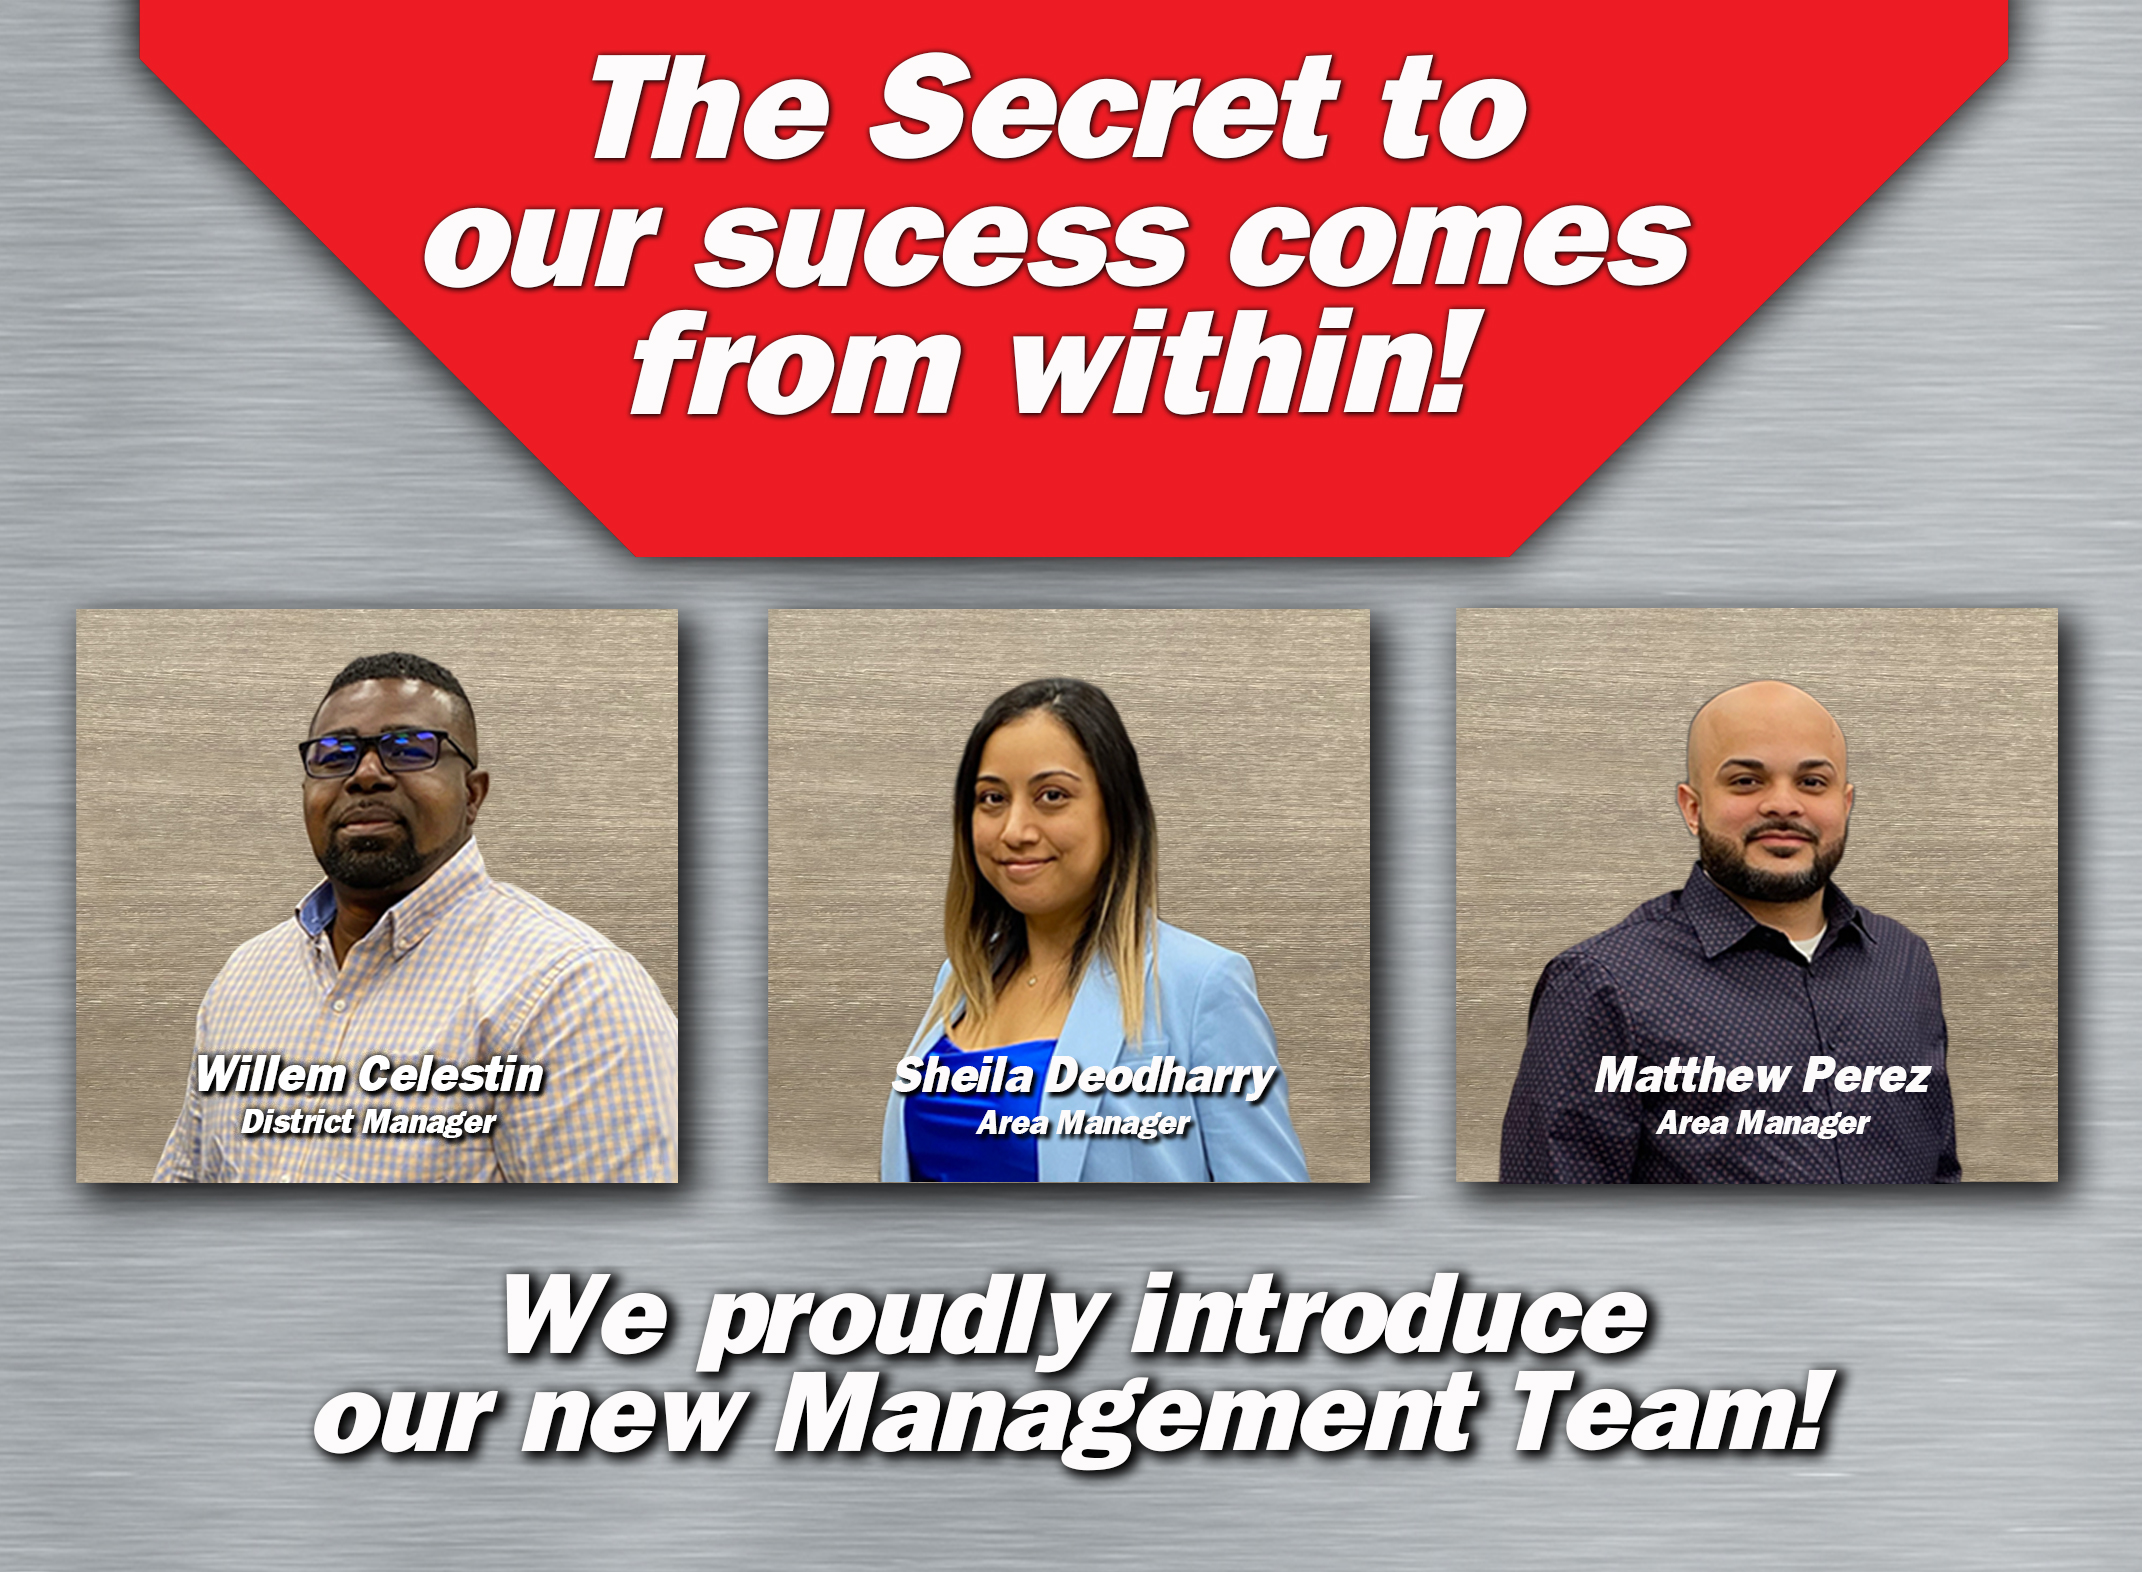 Meet our new District and Area Managers, Matt, Shelia & Willem.